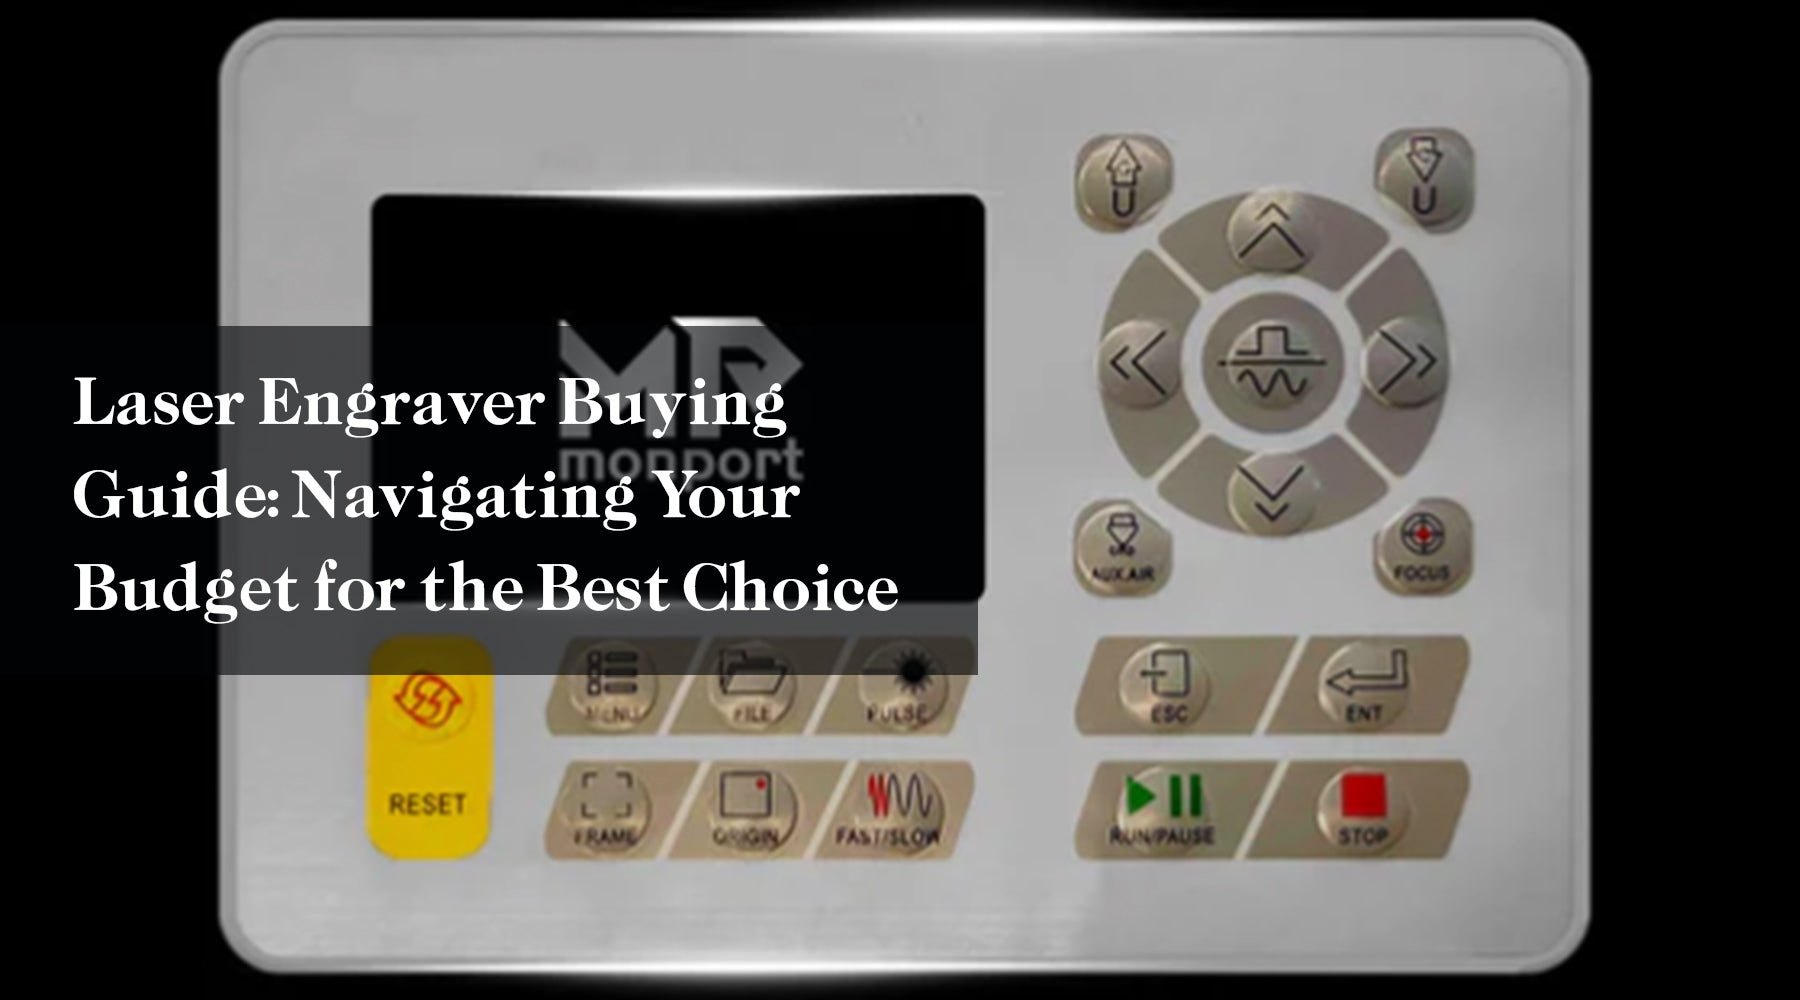 Laser Engraver Buying Guide: Navigating Your Budget for the Best Choice